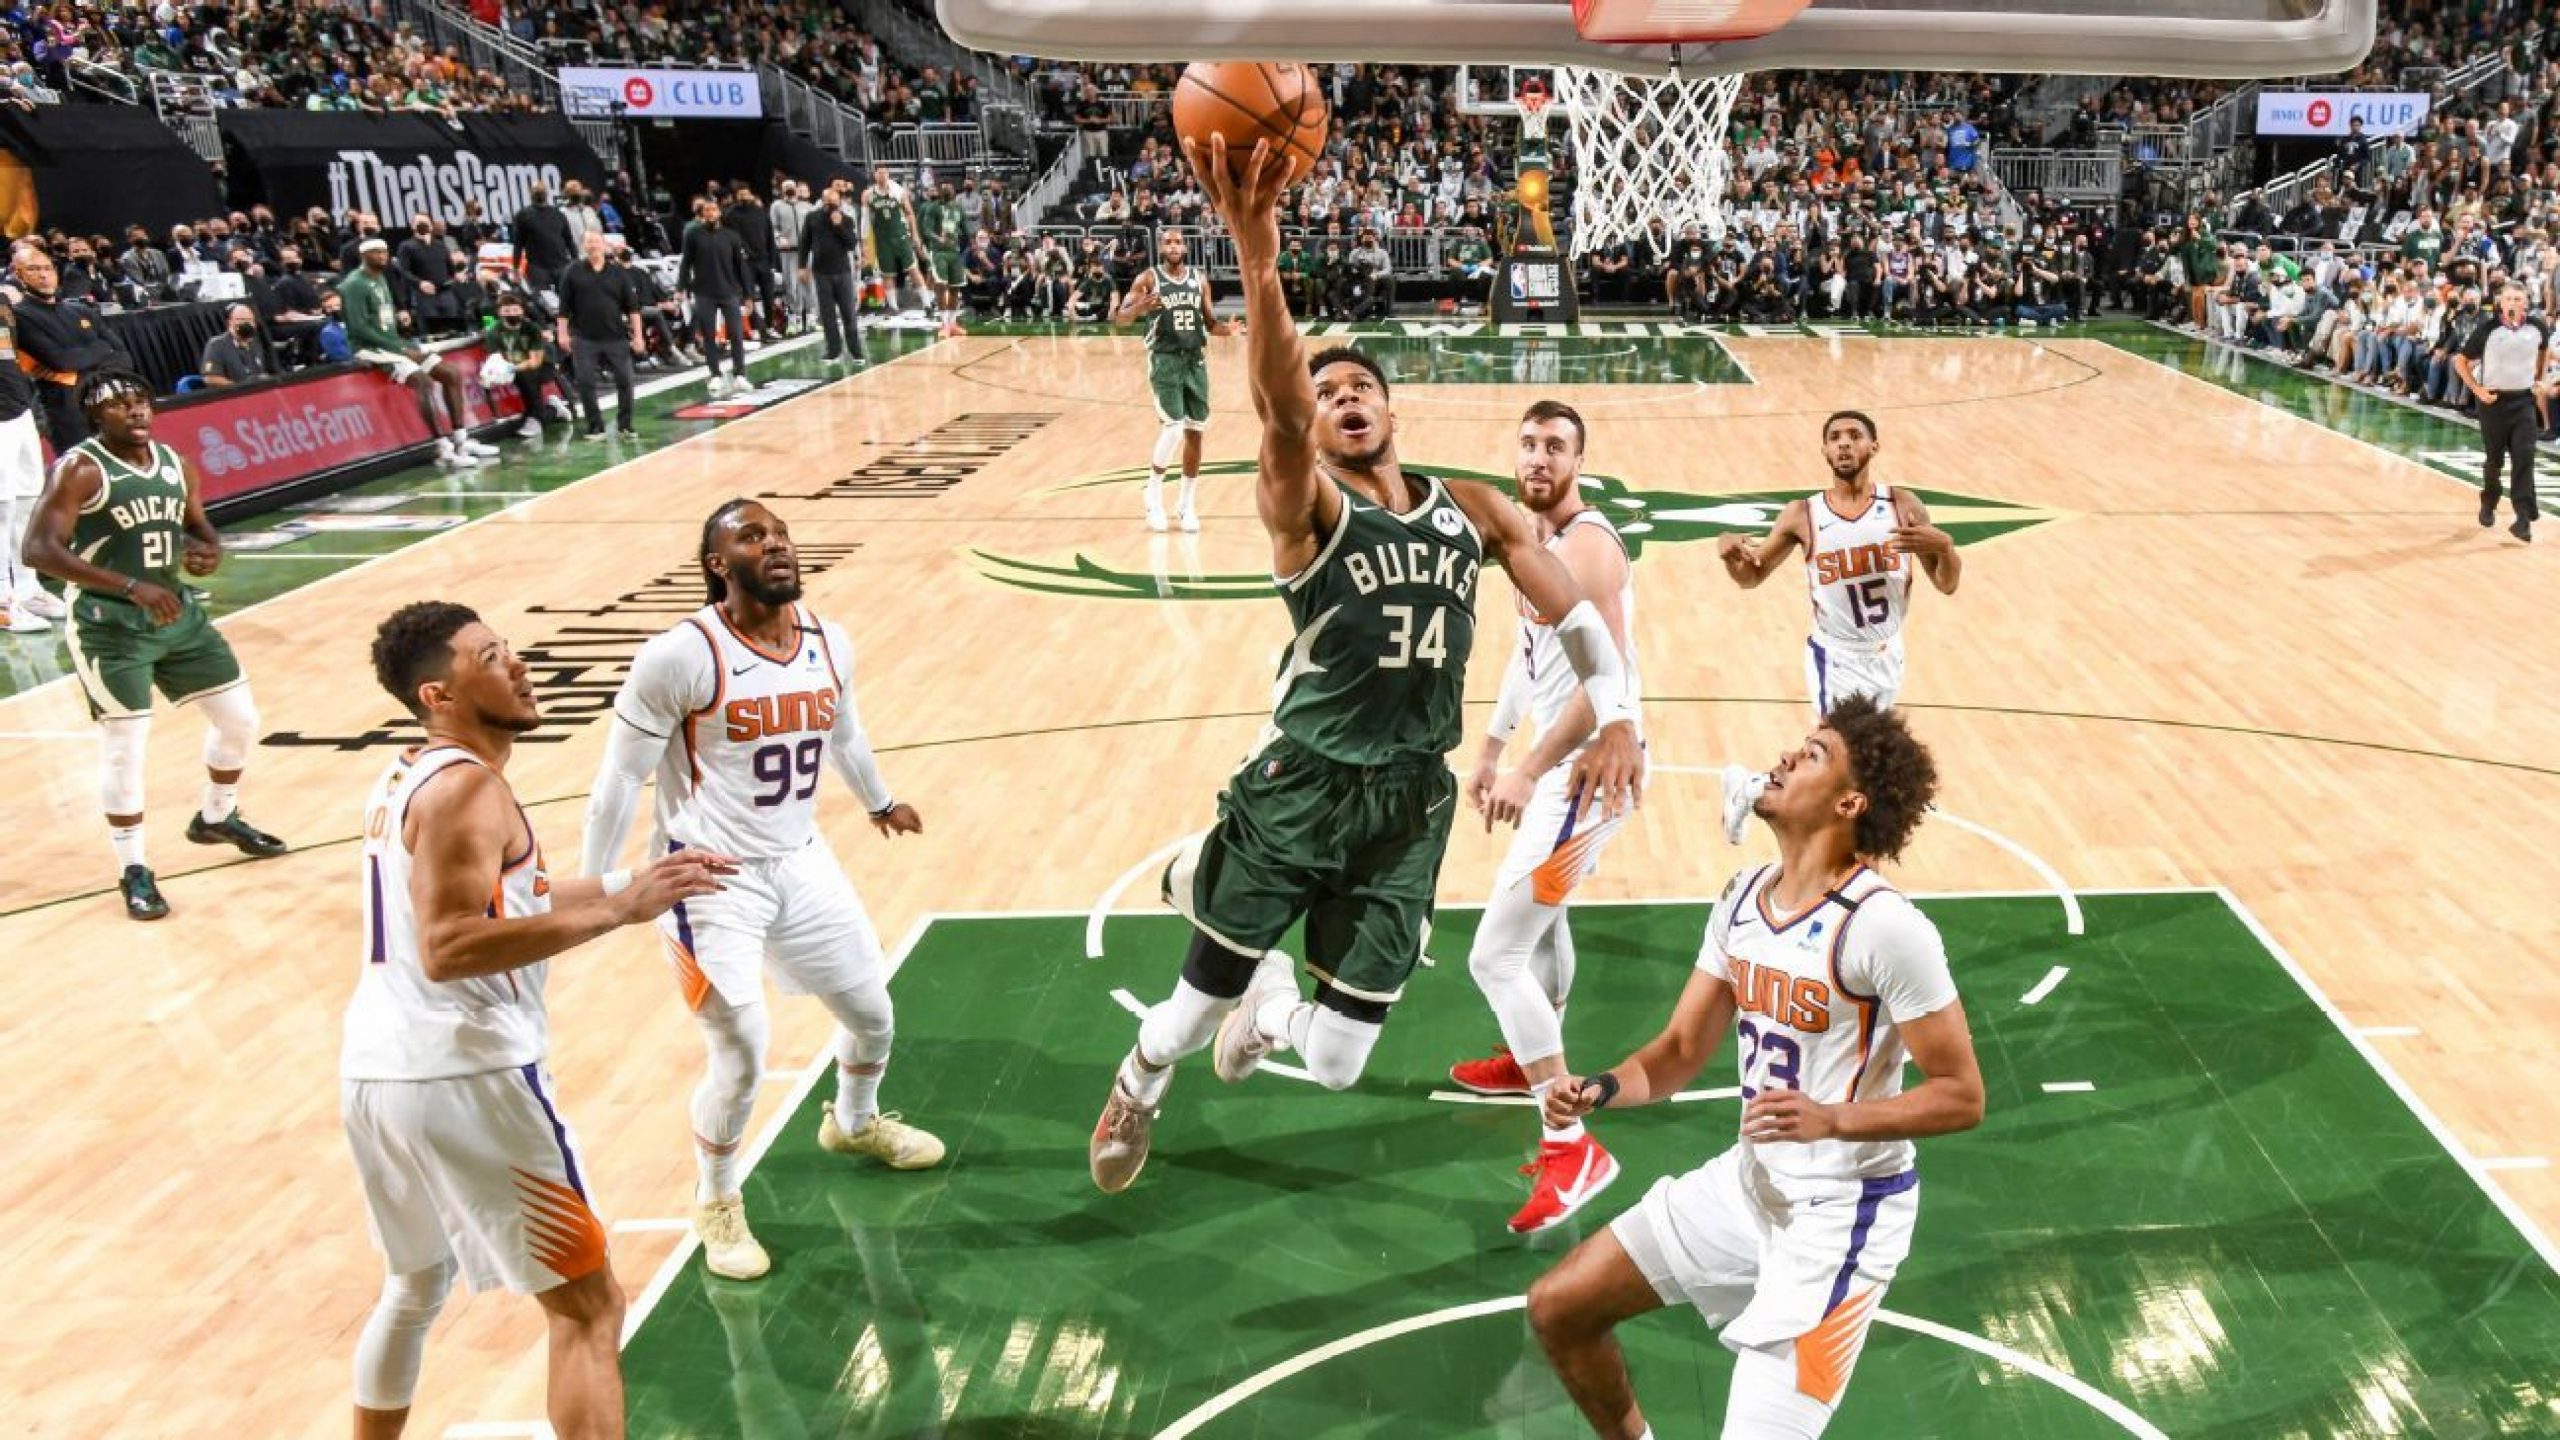 The Bucks reminded the Suns they have the best player in the NBA Finals